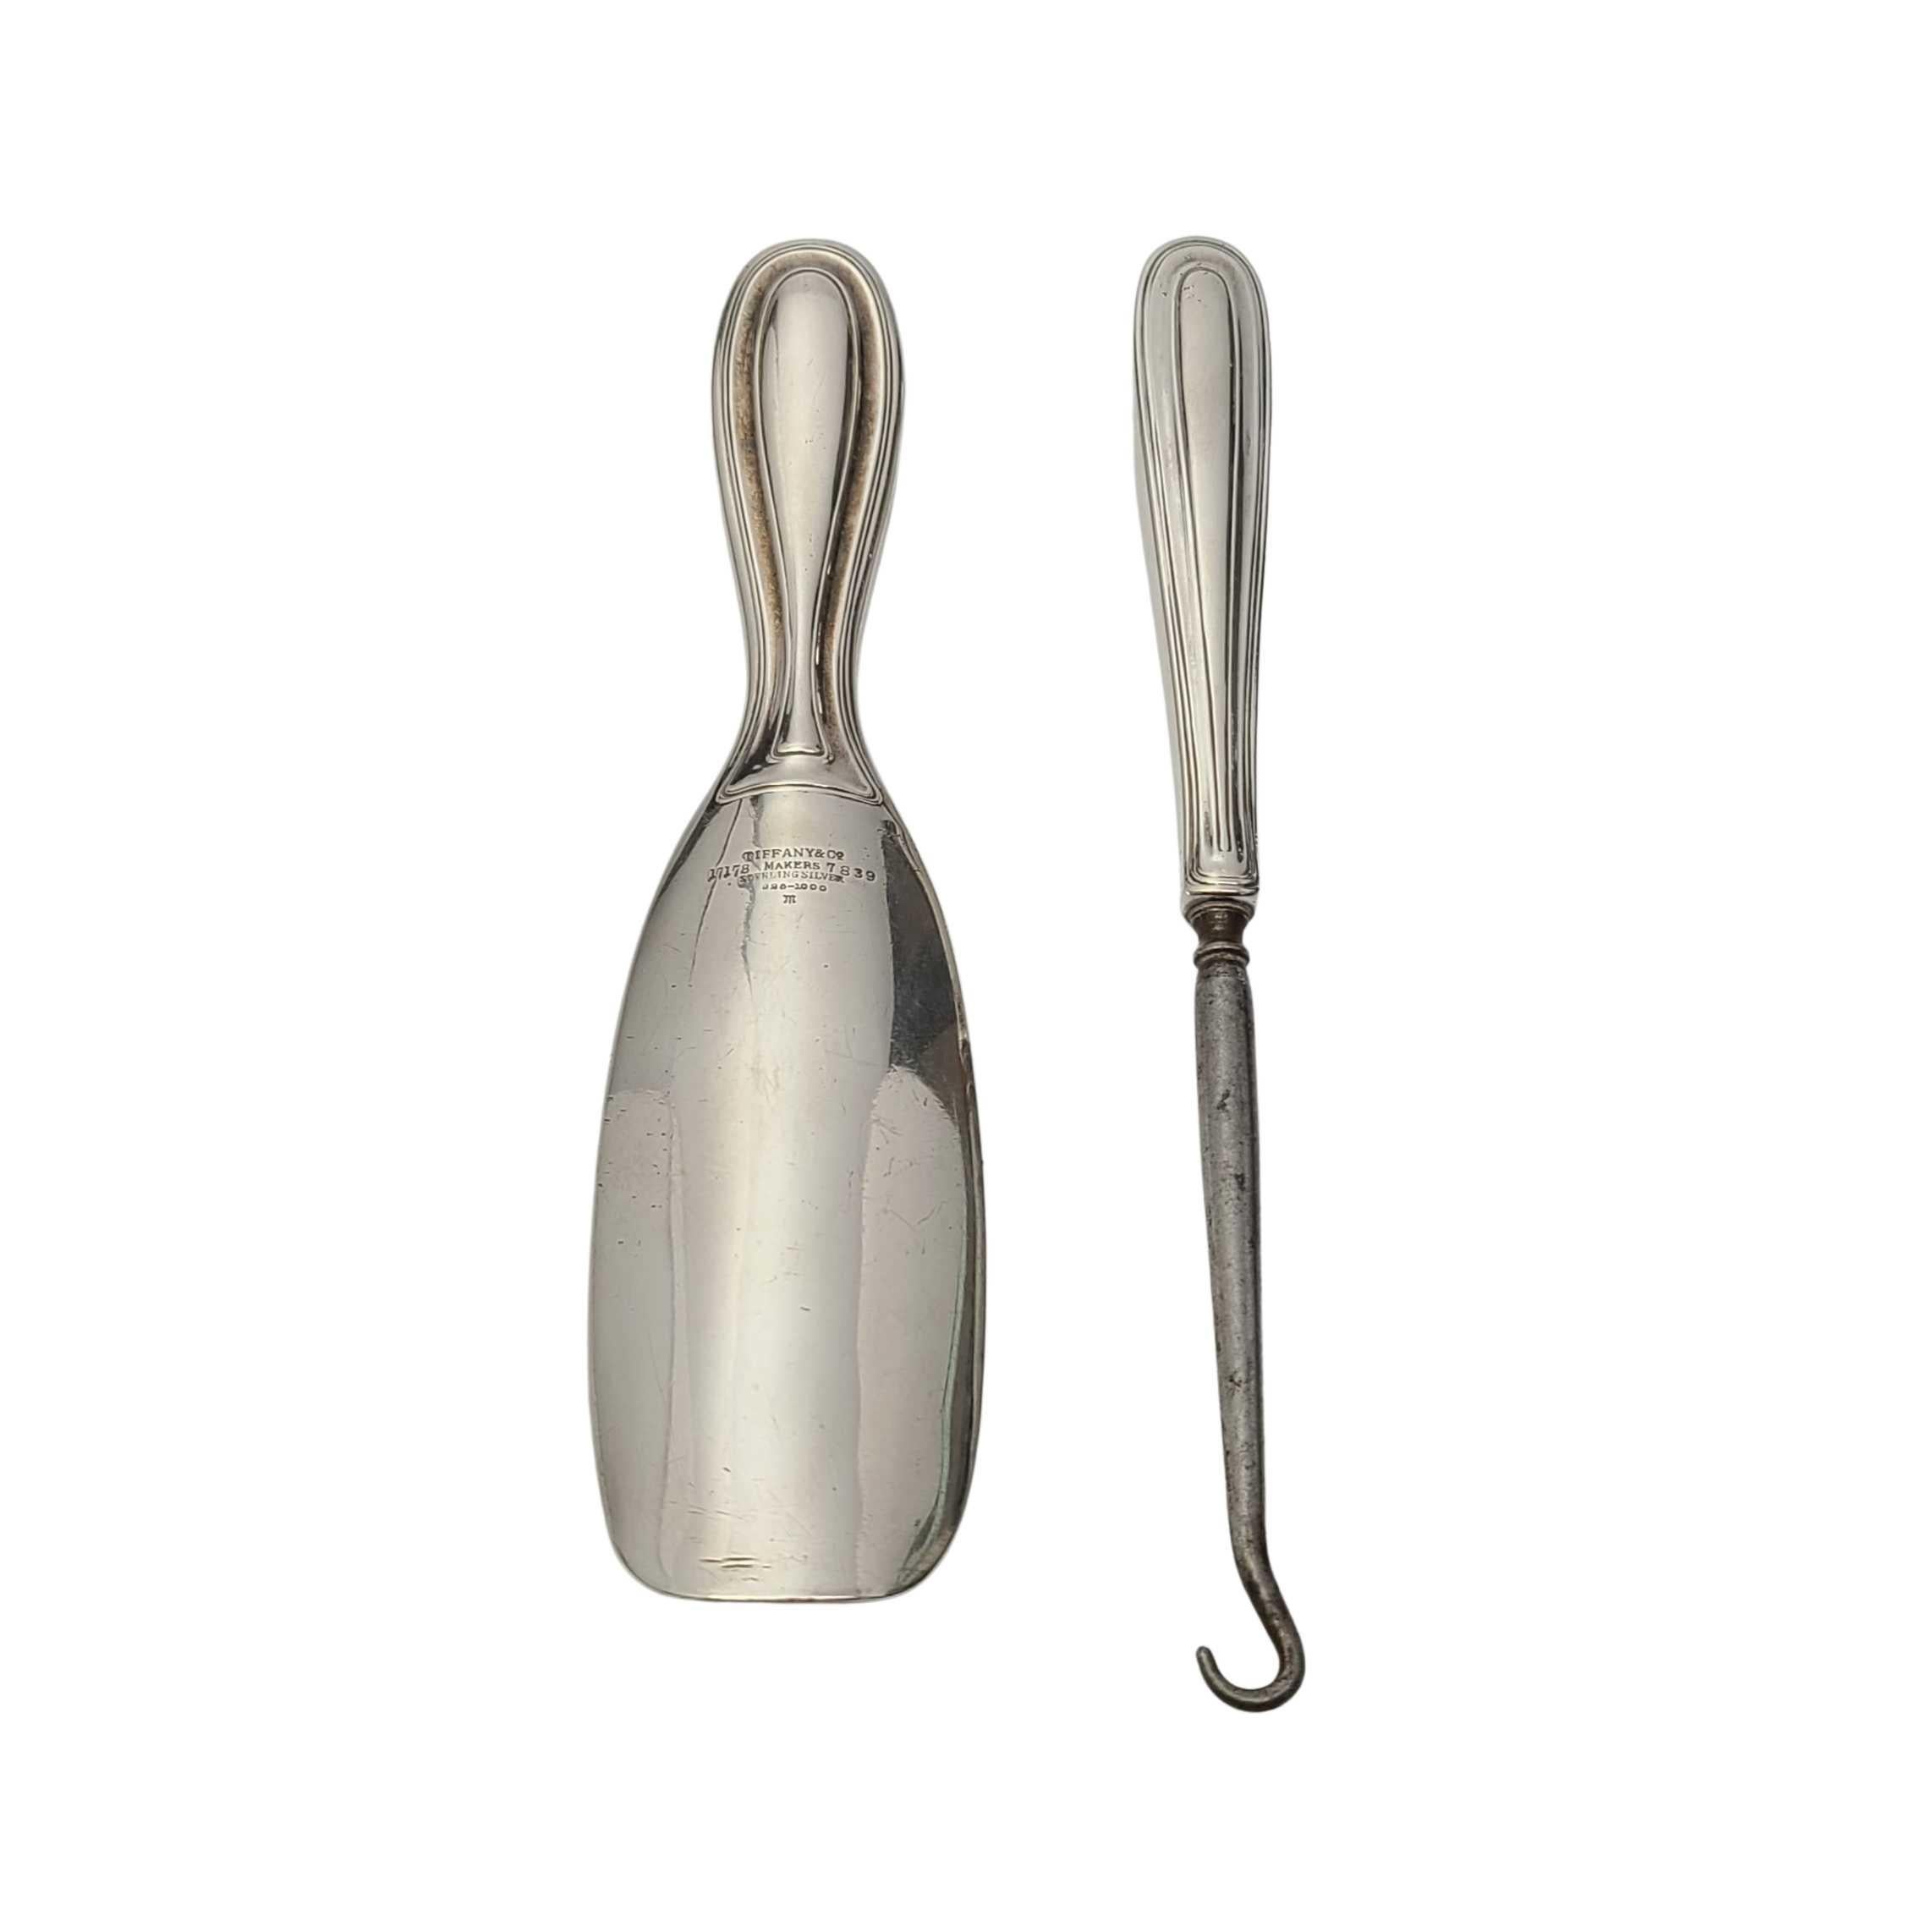 Antique sterling silver show horn and button hook by Tiffany & Co, circa 1908-1909.

Monogram appears to be HBY

Simple and timeless thick handle design. Same monogram on each piece, but engraved in different styles. Hallmarks date these pieces